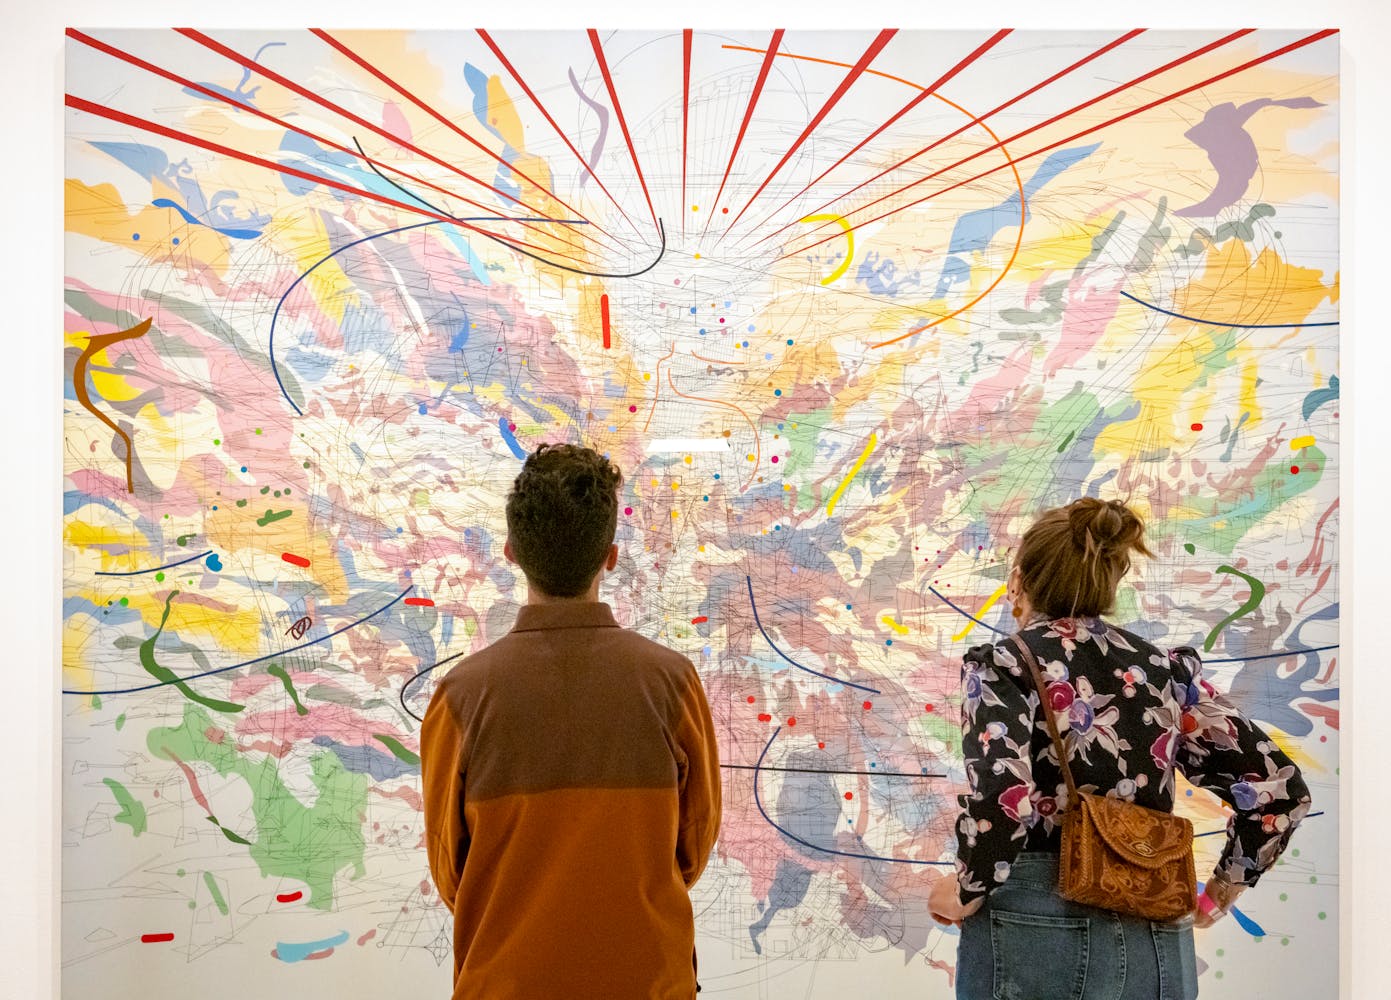 Two people looking at a large, colorful, graphically intricate painting